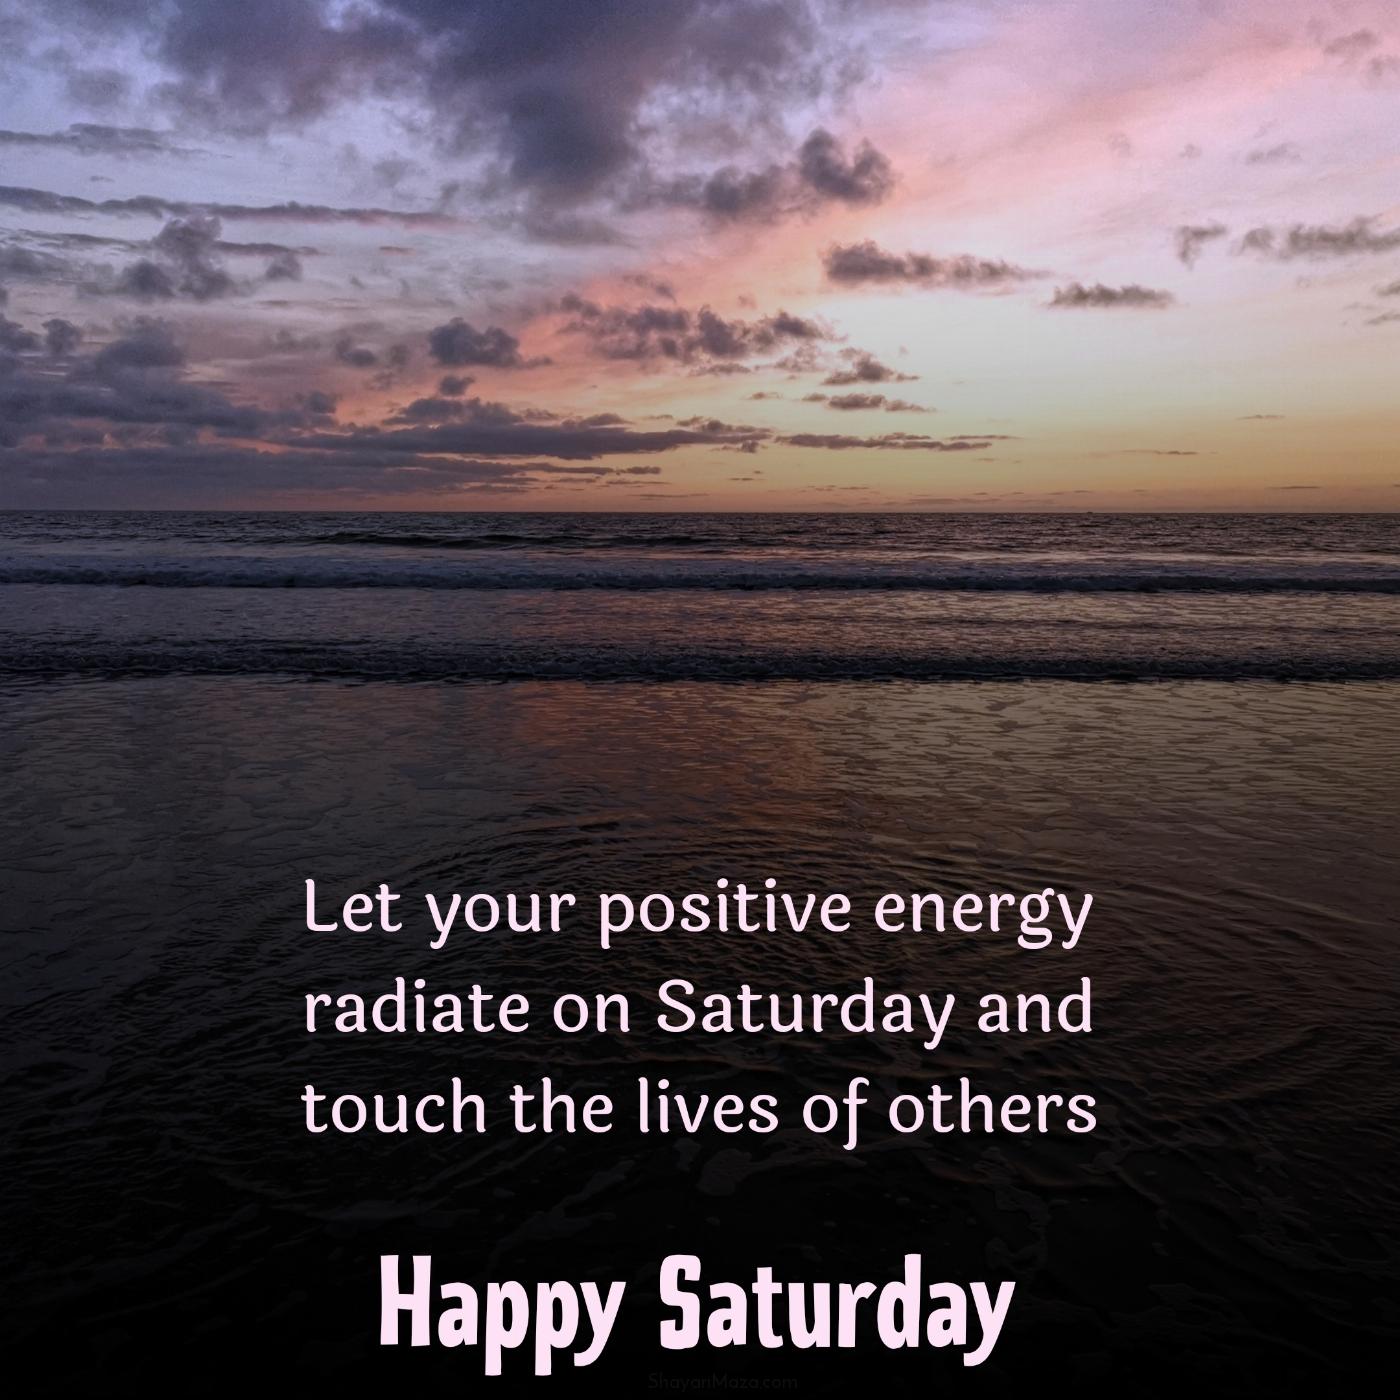 Let your positive energy radiate on Saturday and touch the lives